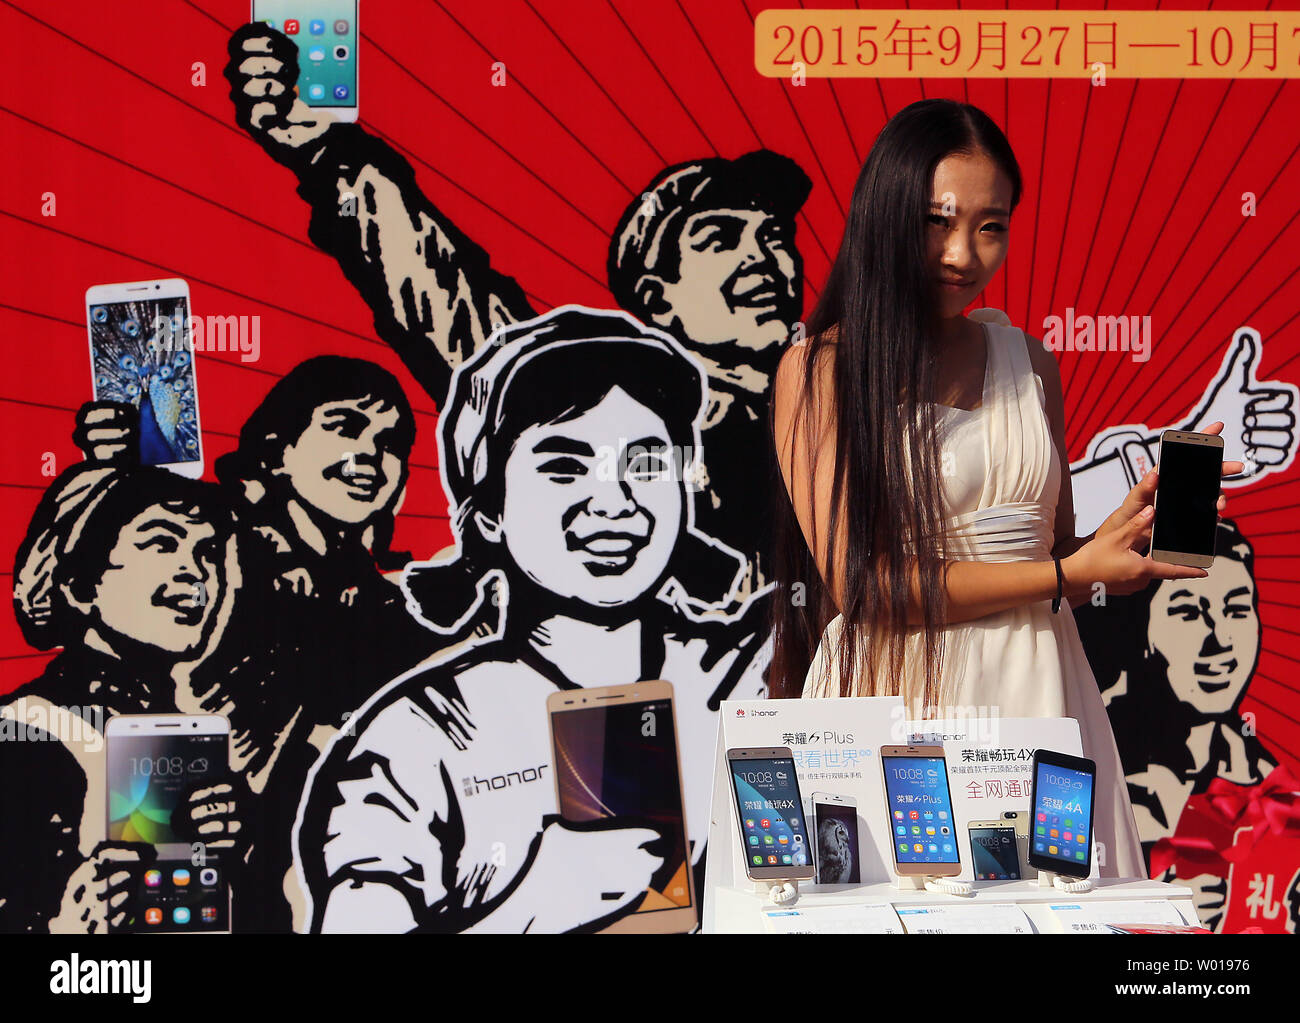 Chinese models promote various smartphones and laptops outside an electronics center notorious for selling fake, grey market and pirated electronics in Beijing on September 27, 2015.  The theft of intellectual property rights and corporate secrets from U.S. companies by China remains a major issue between the two countries.     Photo by Stephen Shaver/UPI Stock Photo